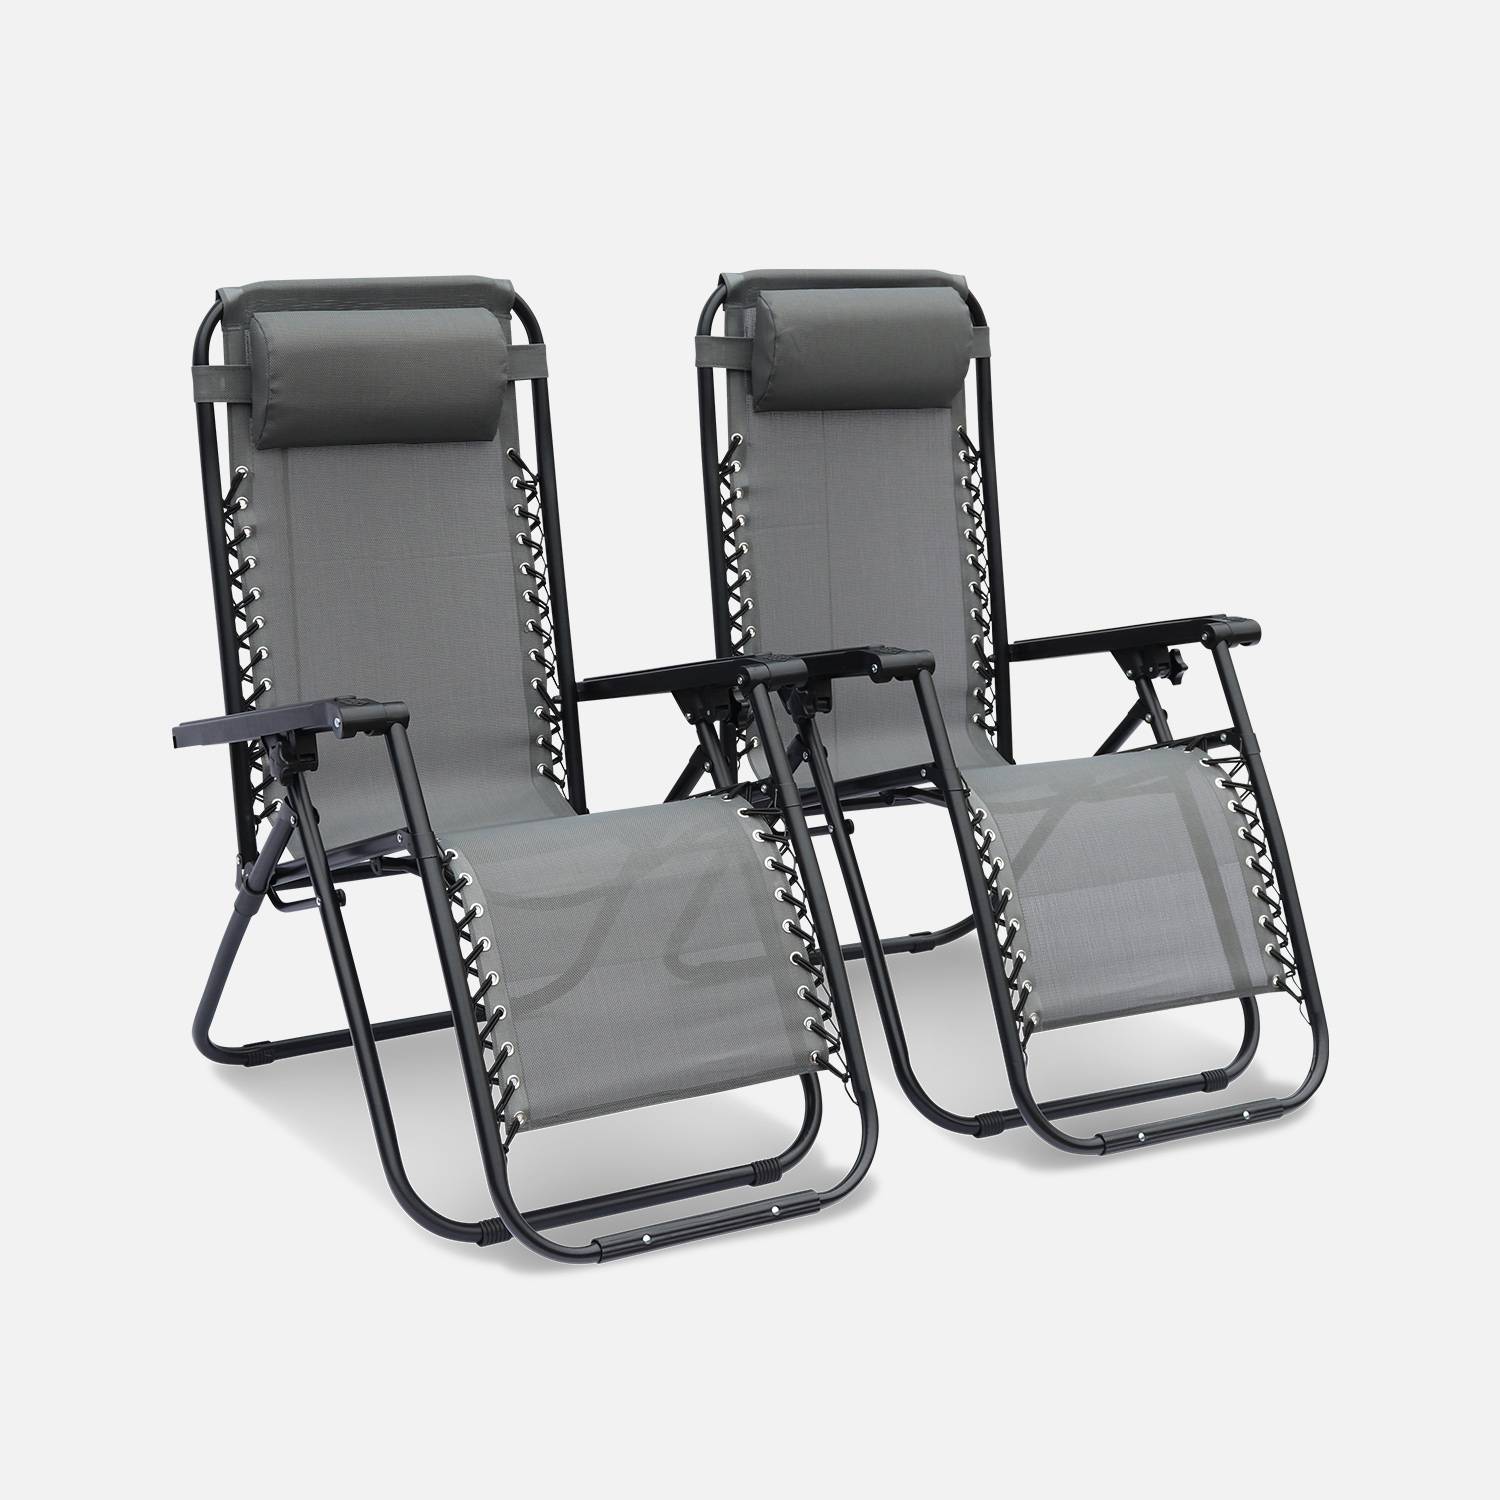 2 textilene reclining chairs - foldable, multi-position - Patrick - Anthracite,sweeek,Photo3